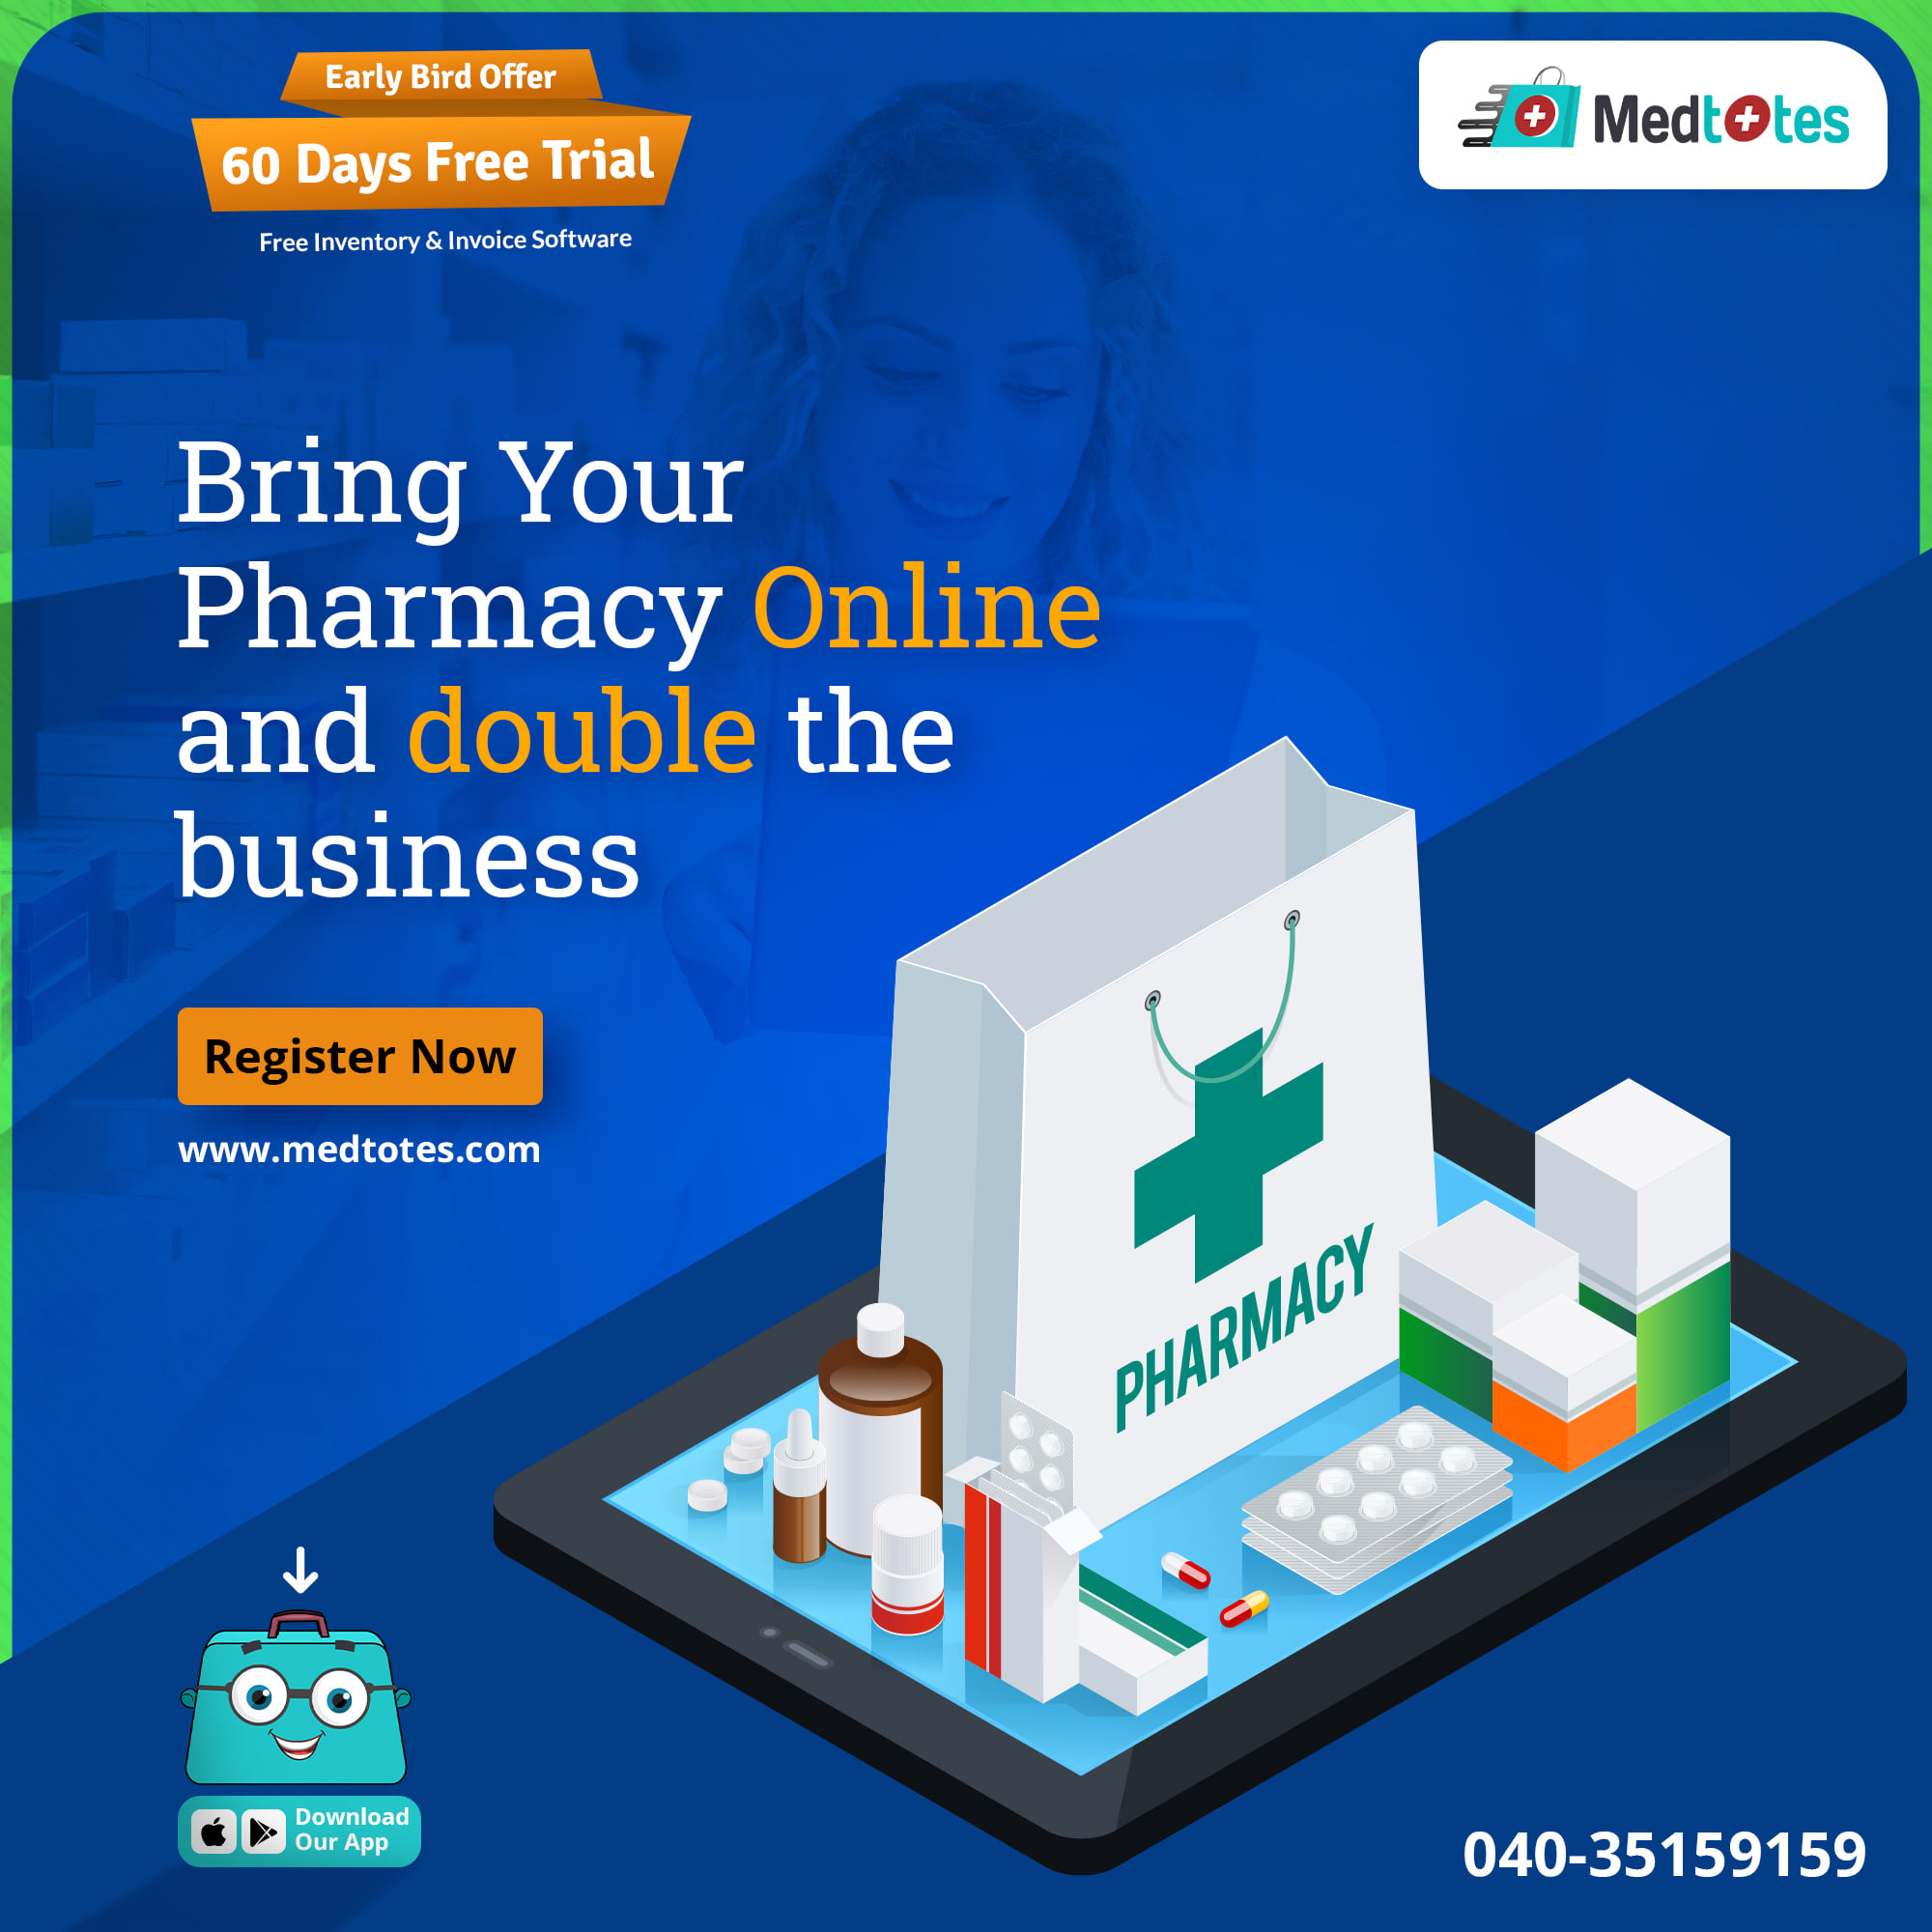 Bring your pharmacy online and boost your business to the next level. Our app will help you to reach to good number of people to promote your business. We have 60 days free trial offer also. Get in touch with our team today for more details.